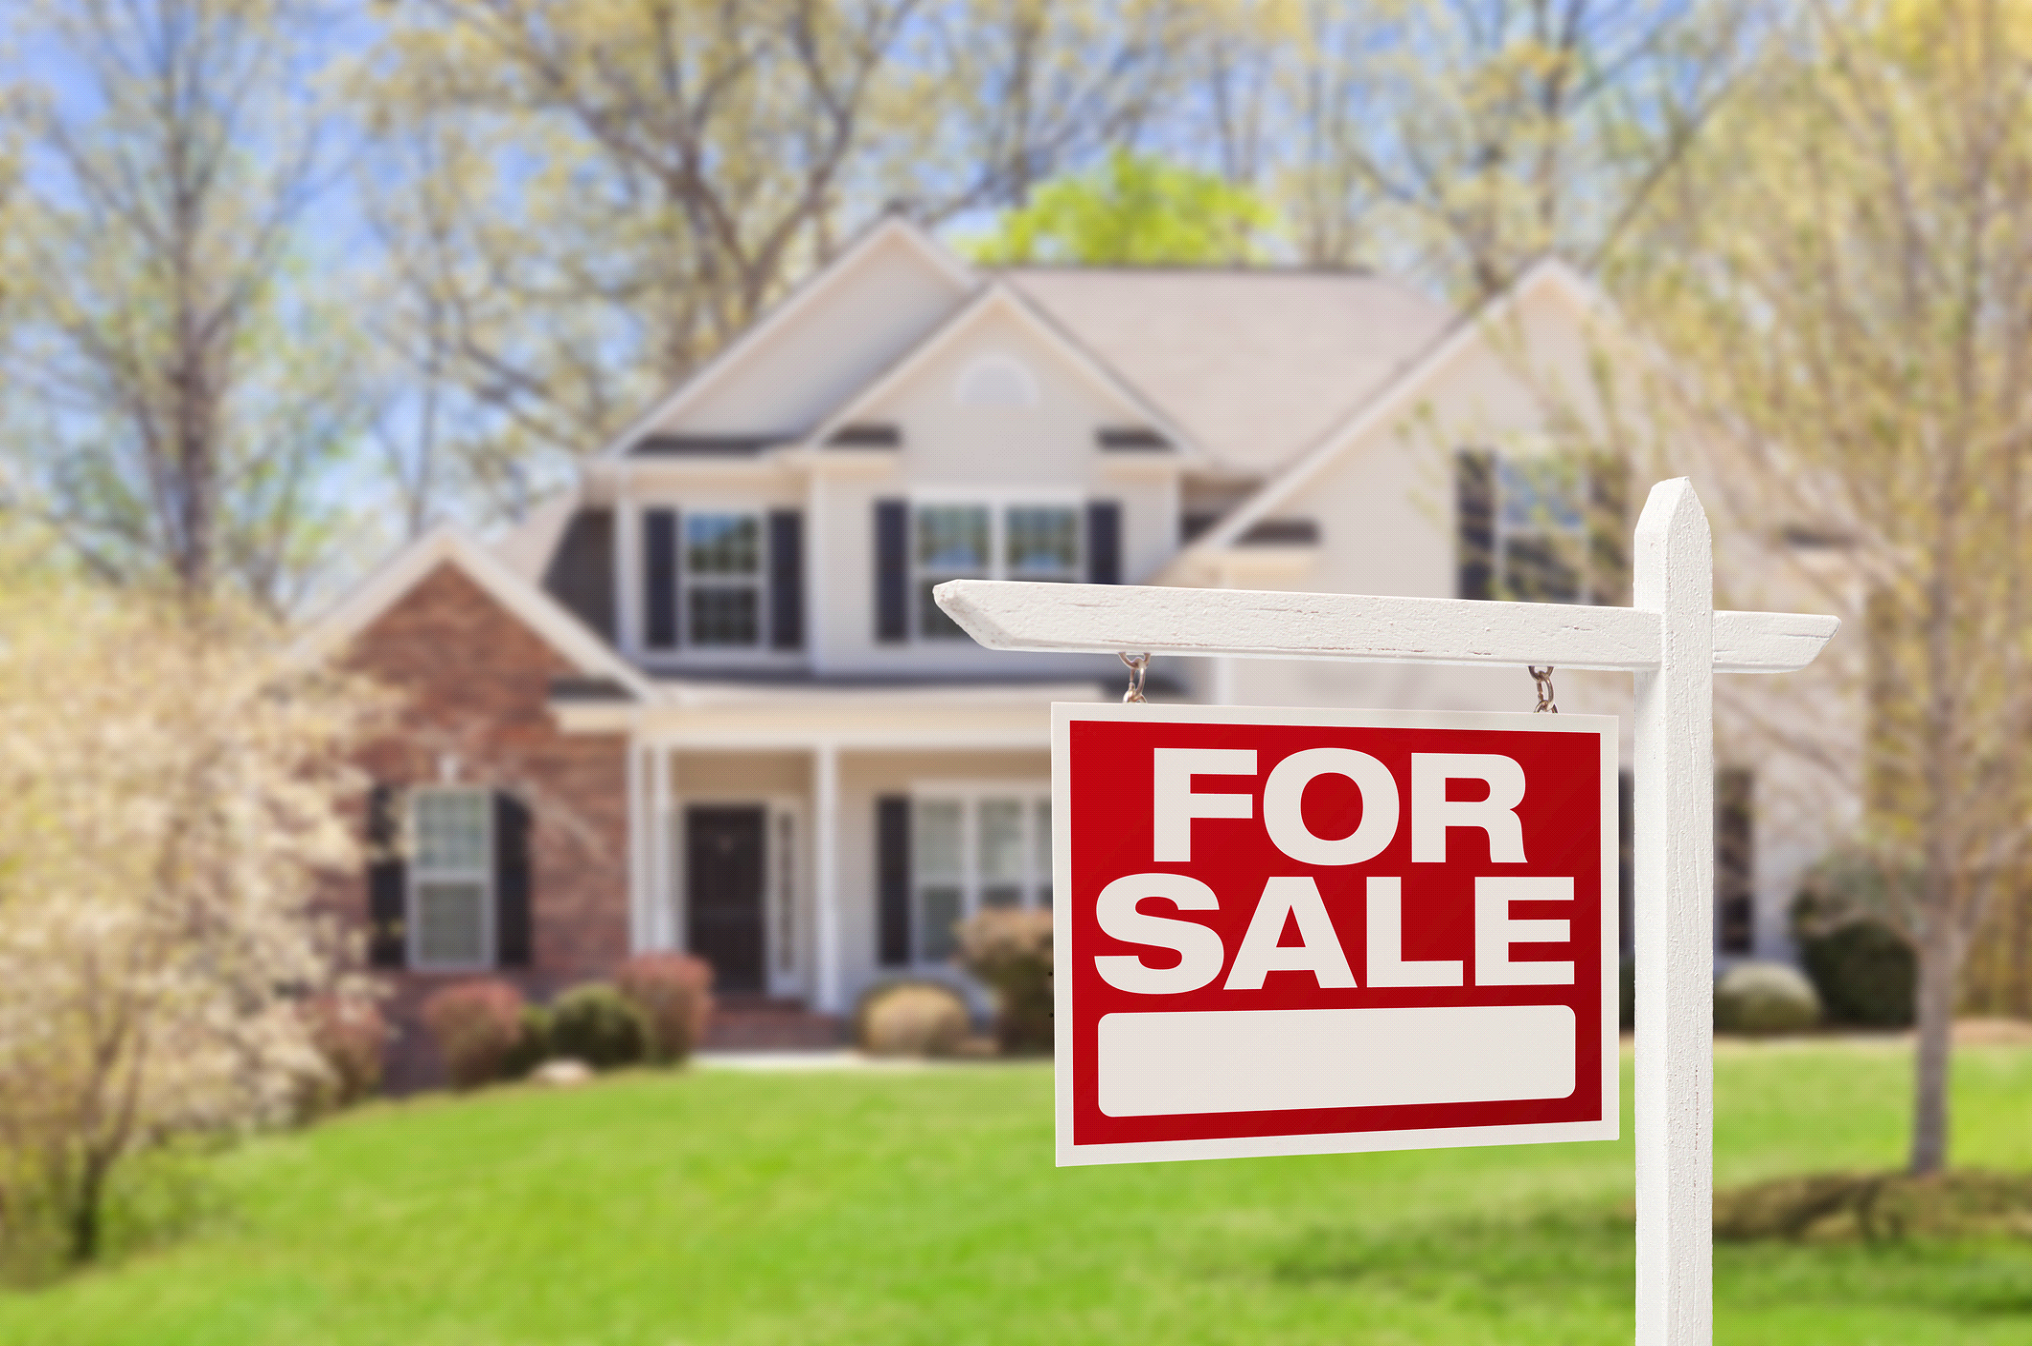 How To Prepare Your Home For Sale